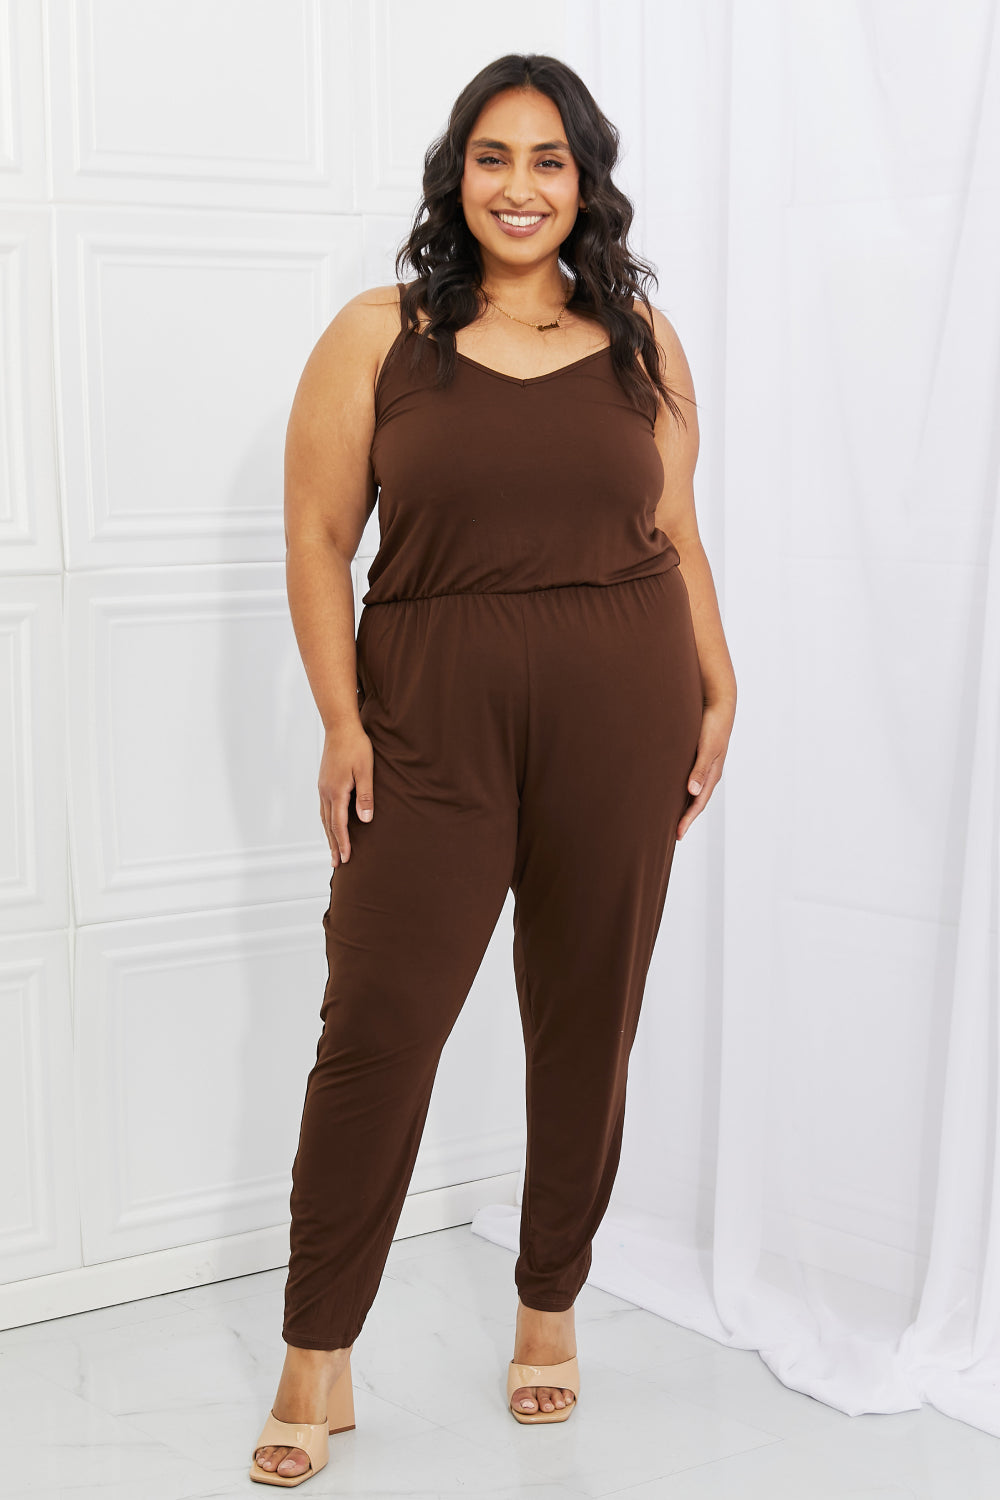 Capella Chocolate Comfy Casual Stretchy Jumpsuit S-3XL